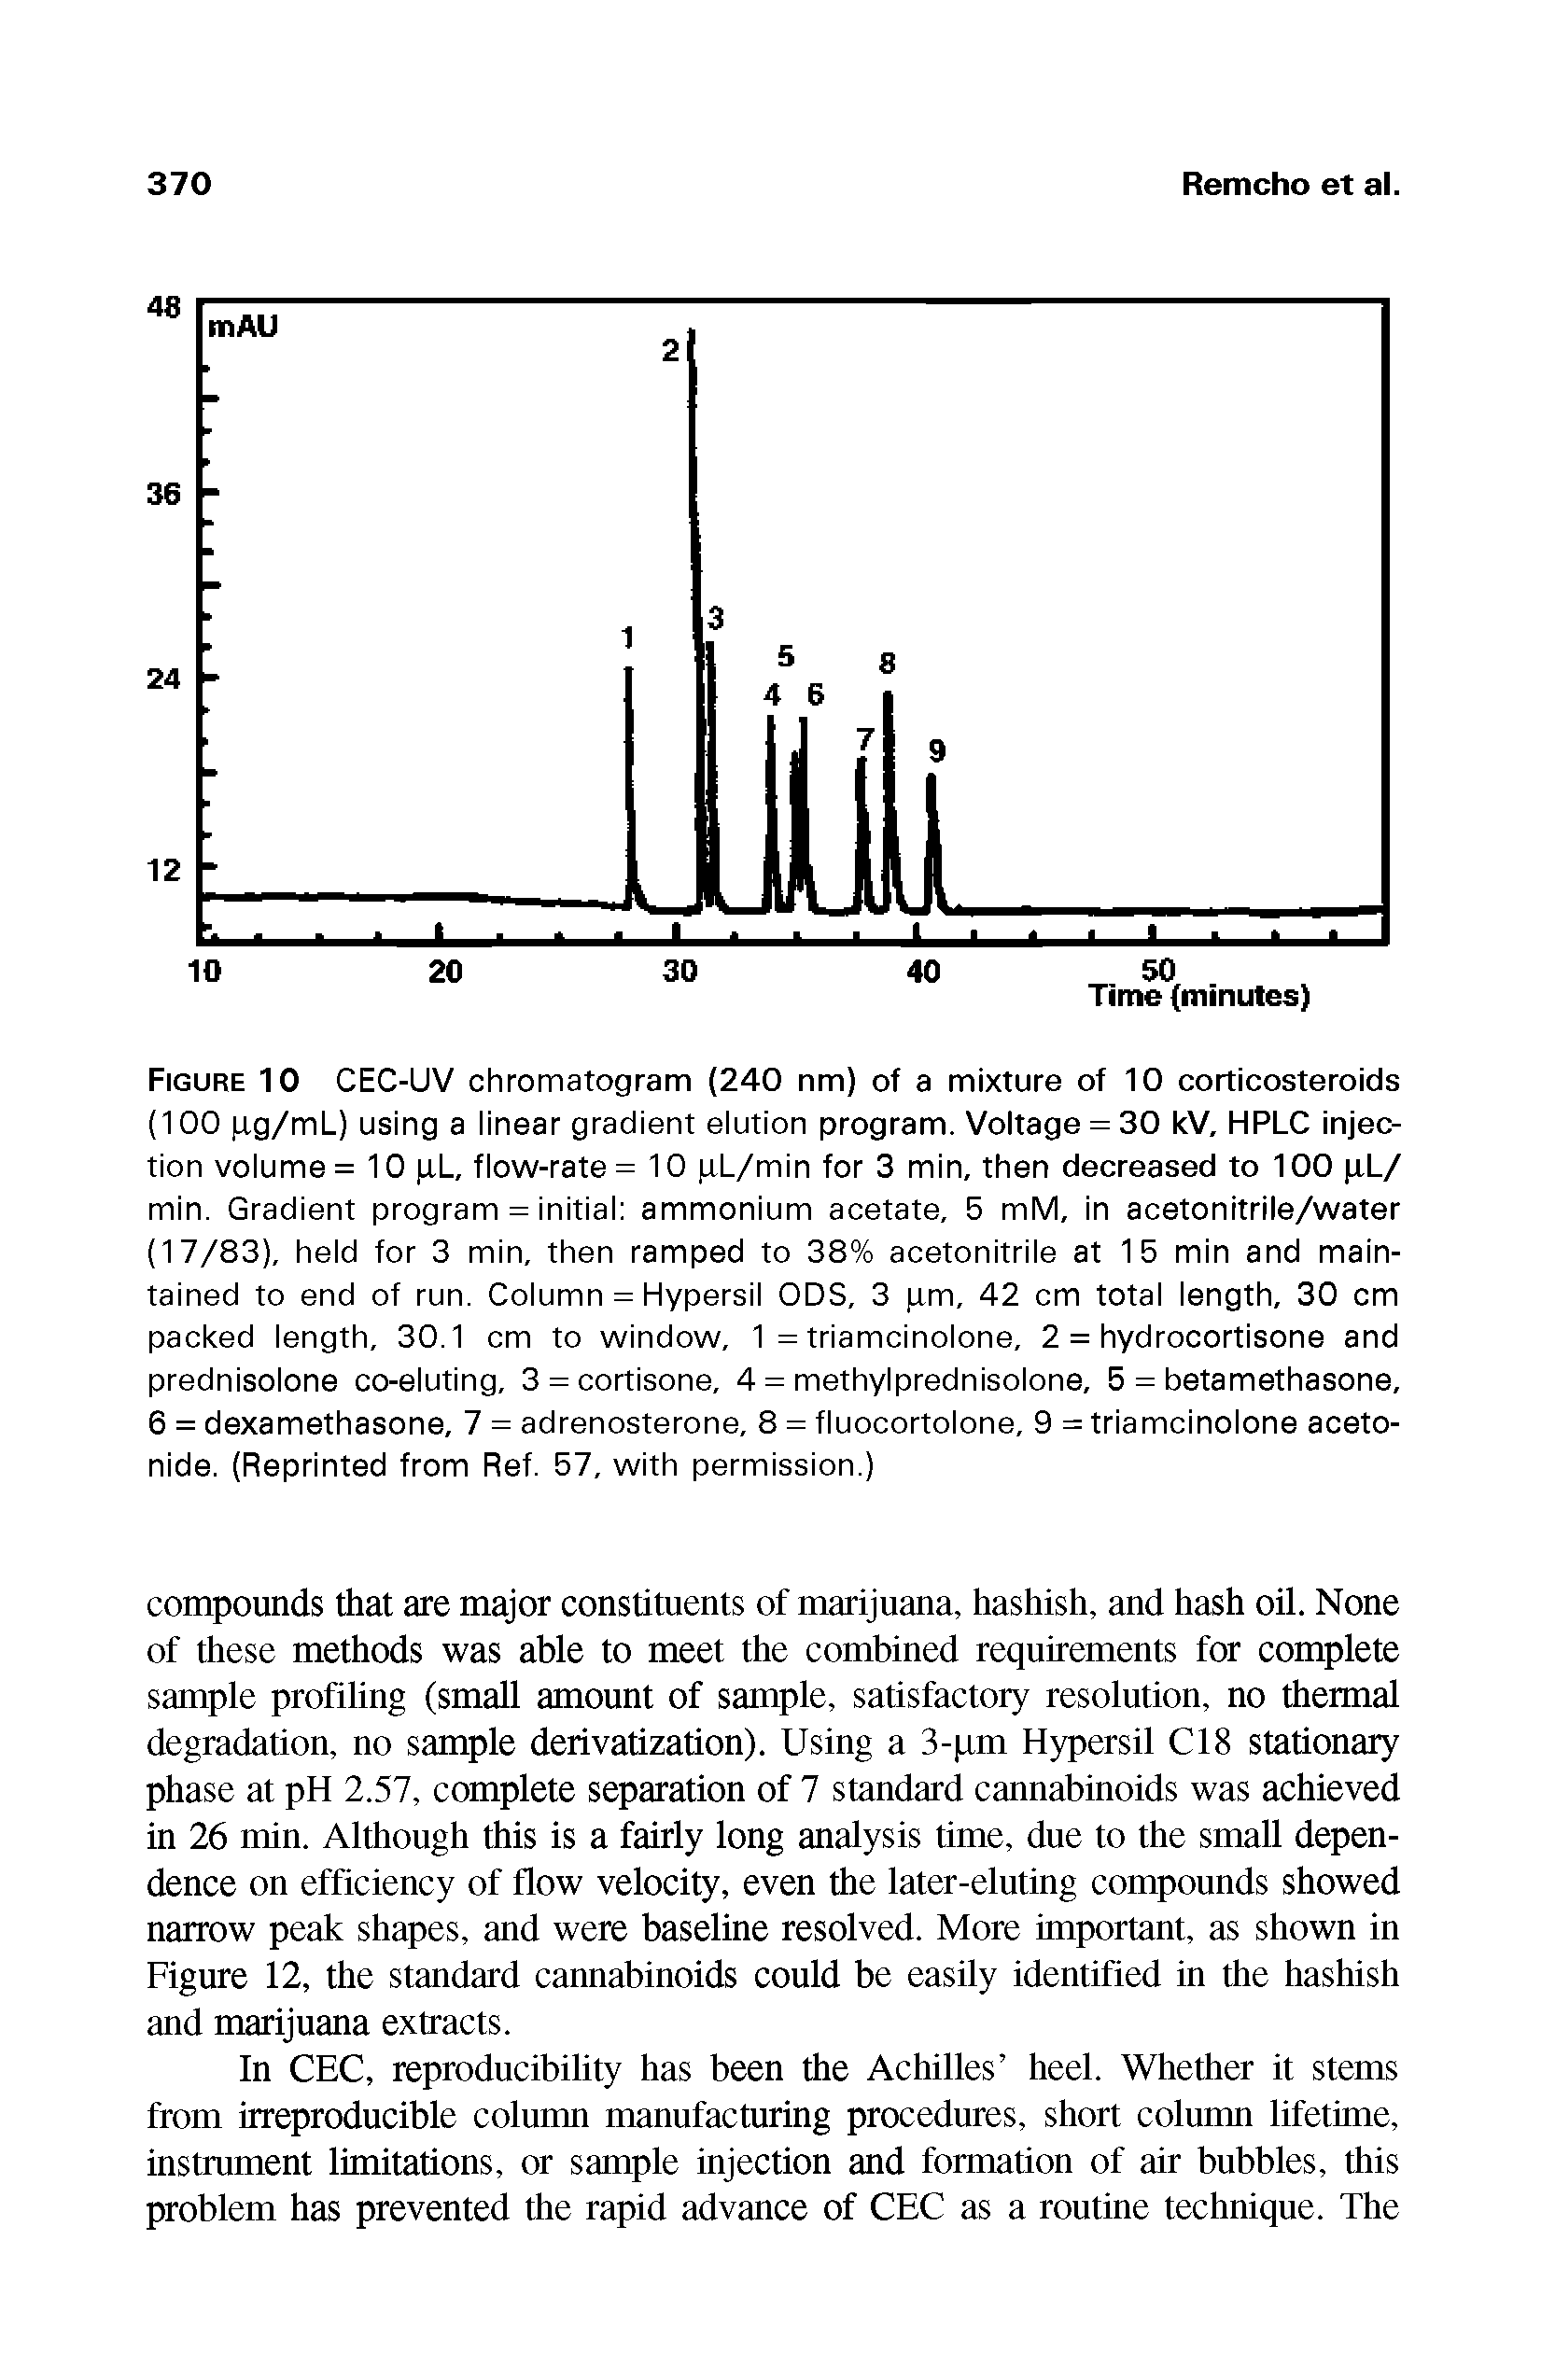 Figure 10 CEC-UV chromatogram (240 nm) of a mixture of 10 corticosteroids (100 qg/mL) using a linear gradient elution program. Voltage = 30 kV, HPLC injection volume = 10 pL, flow-rate = 10 pL/min for 3 min, then decreased to 100 pL/ min. Gradient program = initial ammonium acetate, 5 mM, in acetonitrile/water (17/83), held for 3 min, then ramped to 38% acetonitrile at 15 min and maintained to end of run. Column = Hypersil ODS, 3 pm, 42 cm total length, 30 cm packed length, 30.1 cm to window, 1 = triamcinolone, 2 = hydrocortisone and prednisolone co-eluting, 3 = cortisone, 4 = methylprednisolone, 5 = betamethasone, 6 = dexamethasone, 7 = adrenosterone, 8 = fluocortolone, 9 = triamcinolone aceto-nide. (Reprinted from Ref. 57, with permission.)...